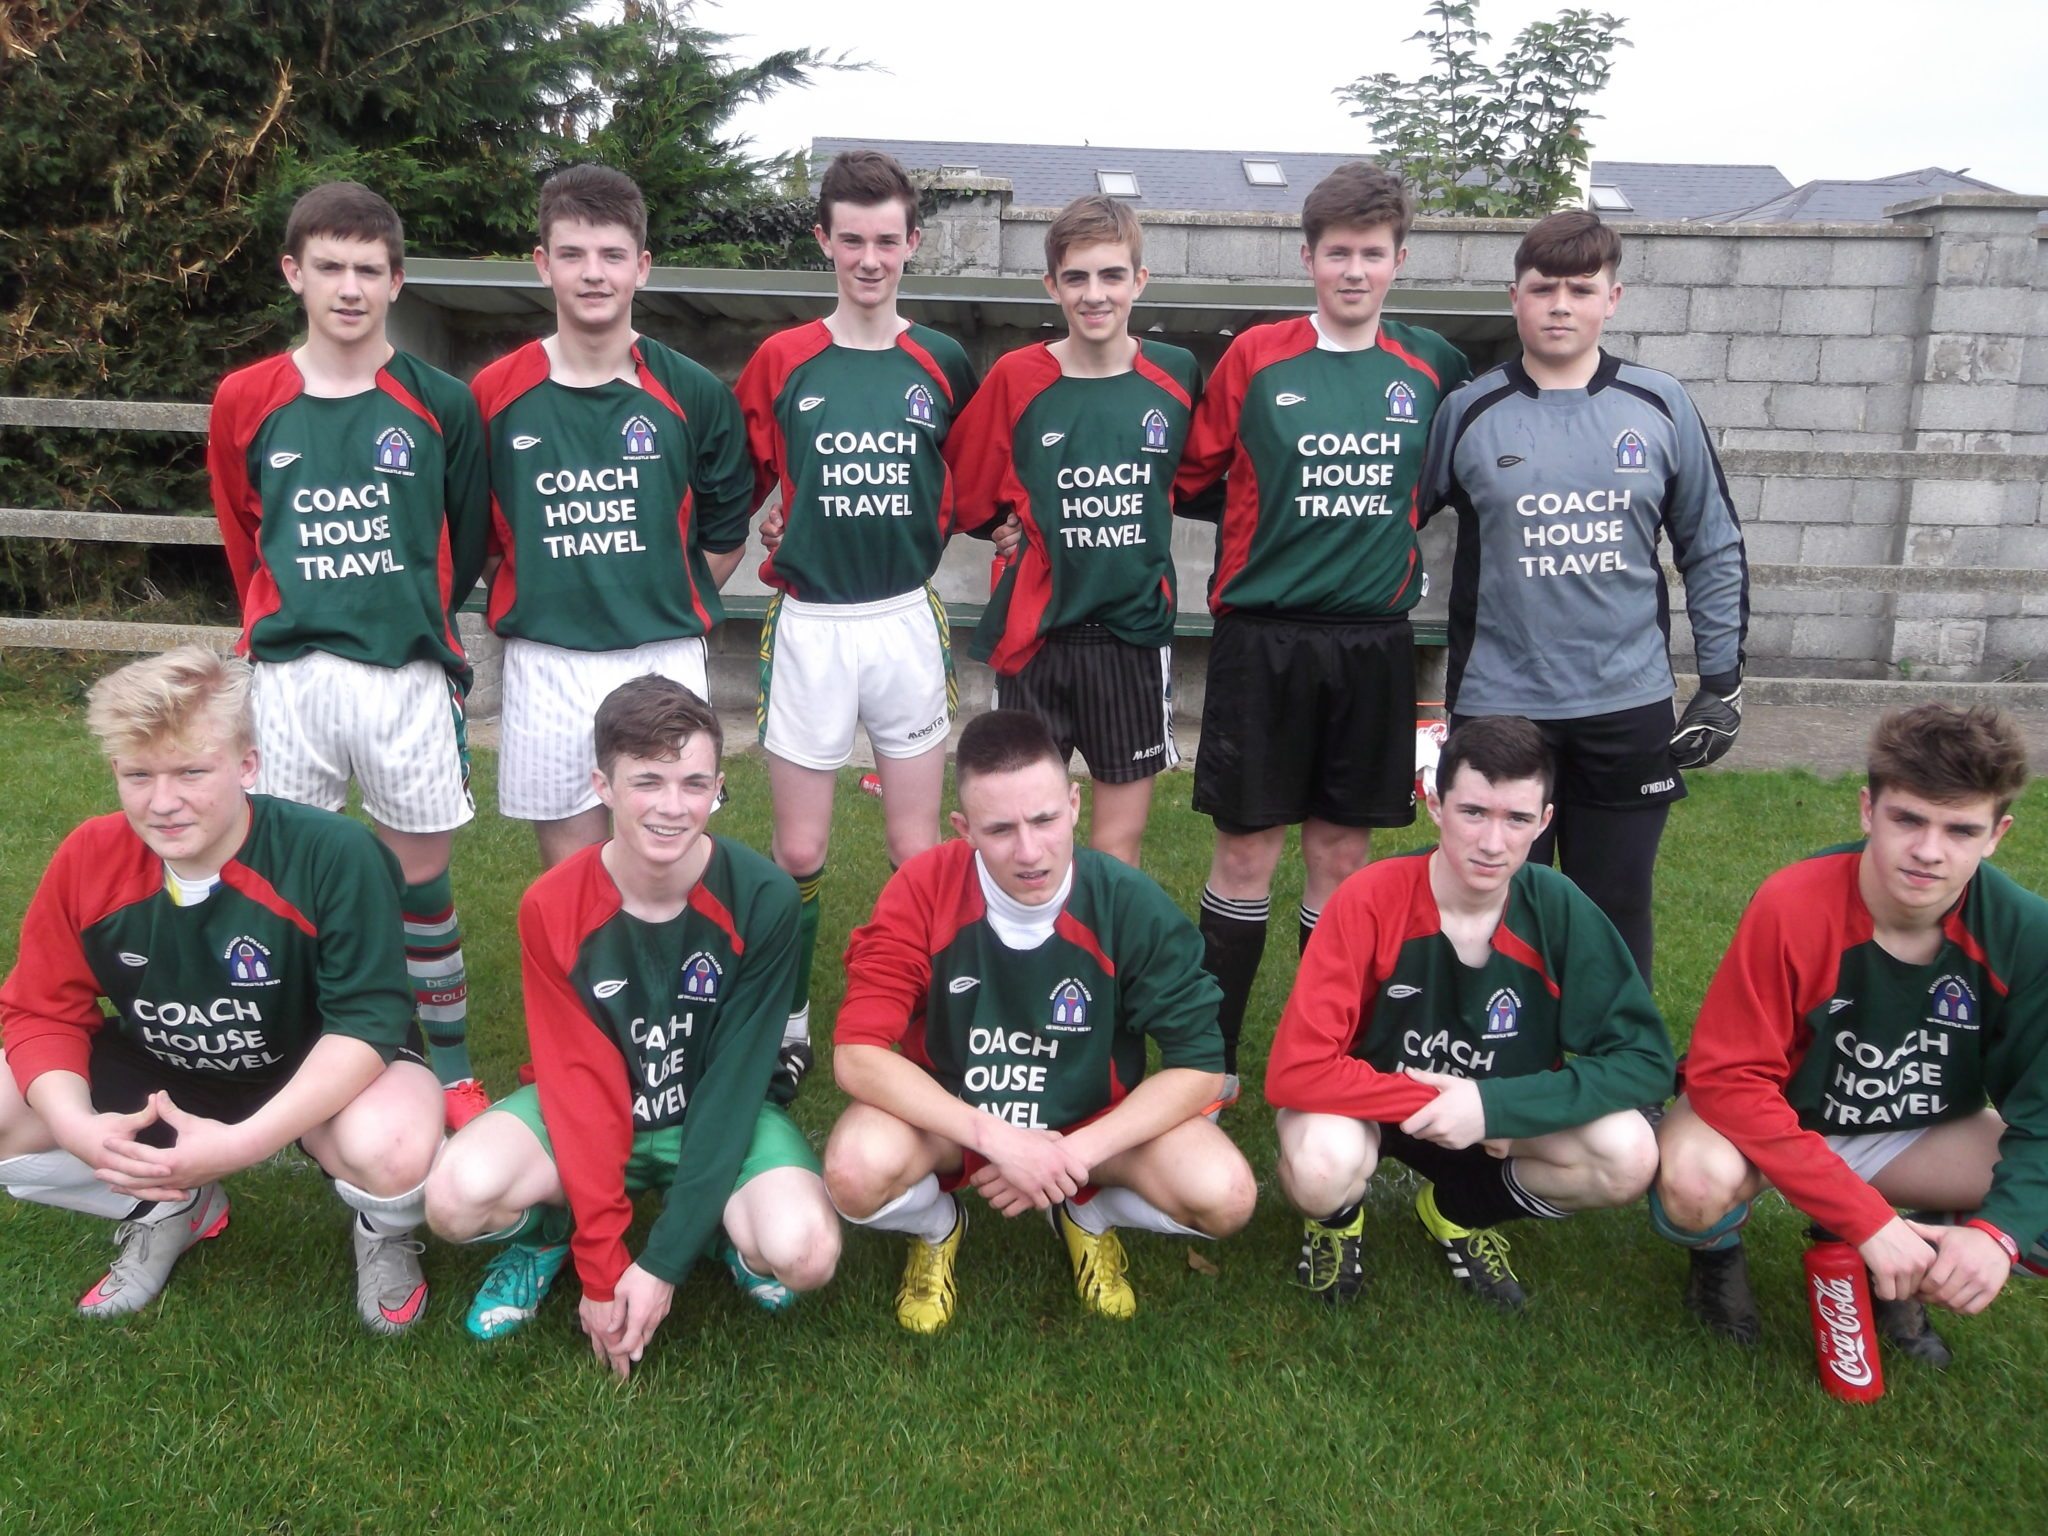 November 2015: Desmond College students in the U17 Soccer Team defeated Killmallock in the Munster Competition